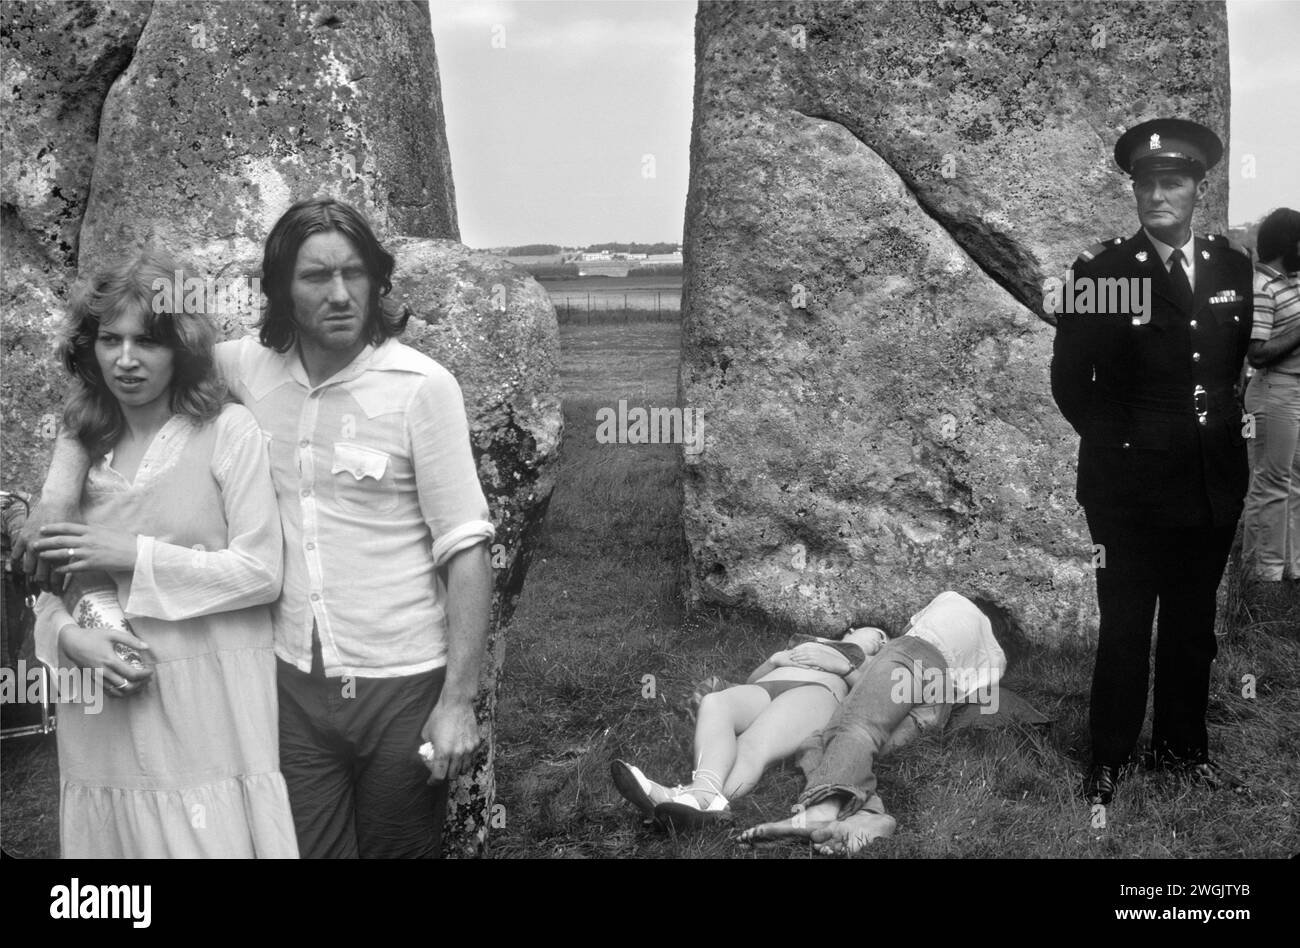 Stonehenge Free Festival at the summer solstice, Wiltshire, England June 21st 1979. Besides the hippies a small group of English tourists watched as others lay in the sun and a 'guard' stood by watching. 1970s UK HOMER SYKES Stock Photo